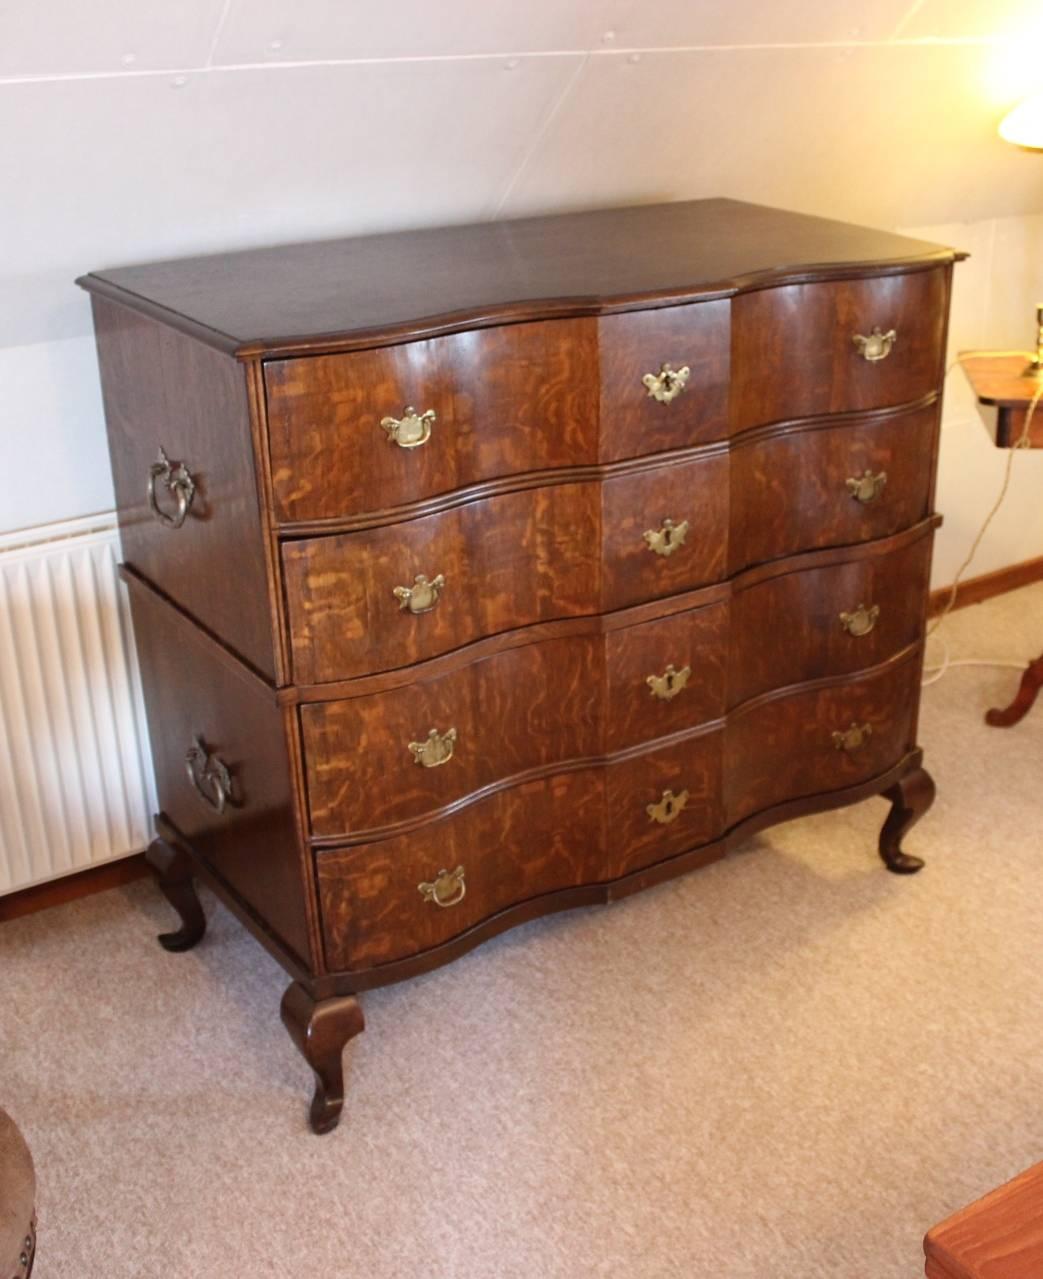 Large baroque style chest of drawers in oak from 1740. The chest is from Denmark made by an unknown cabinetmaker.